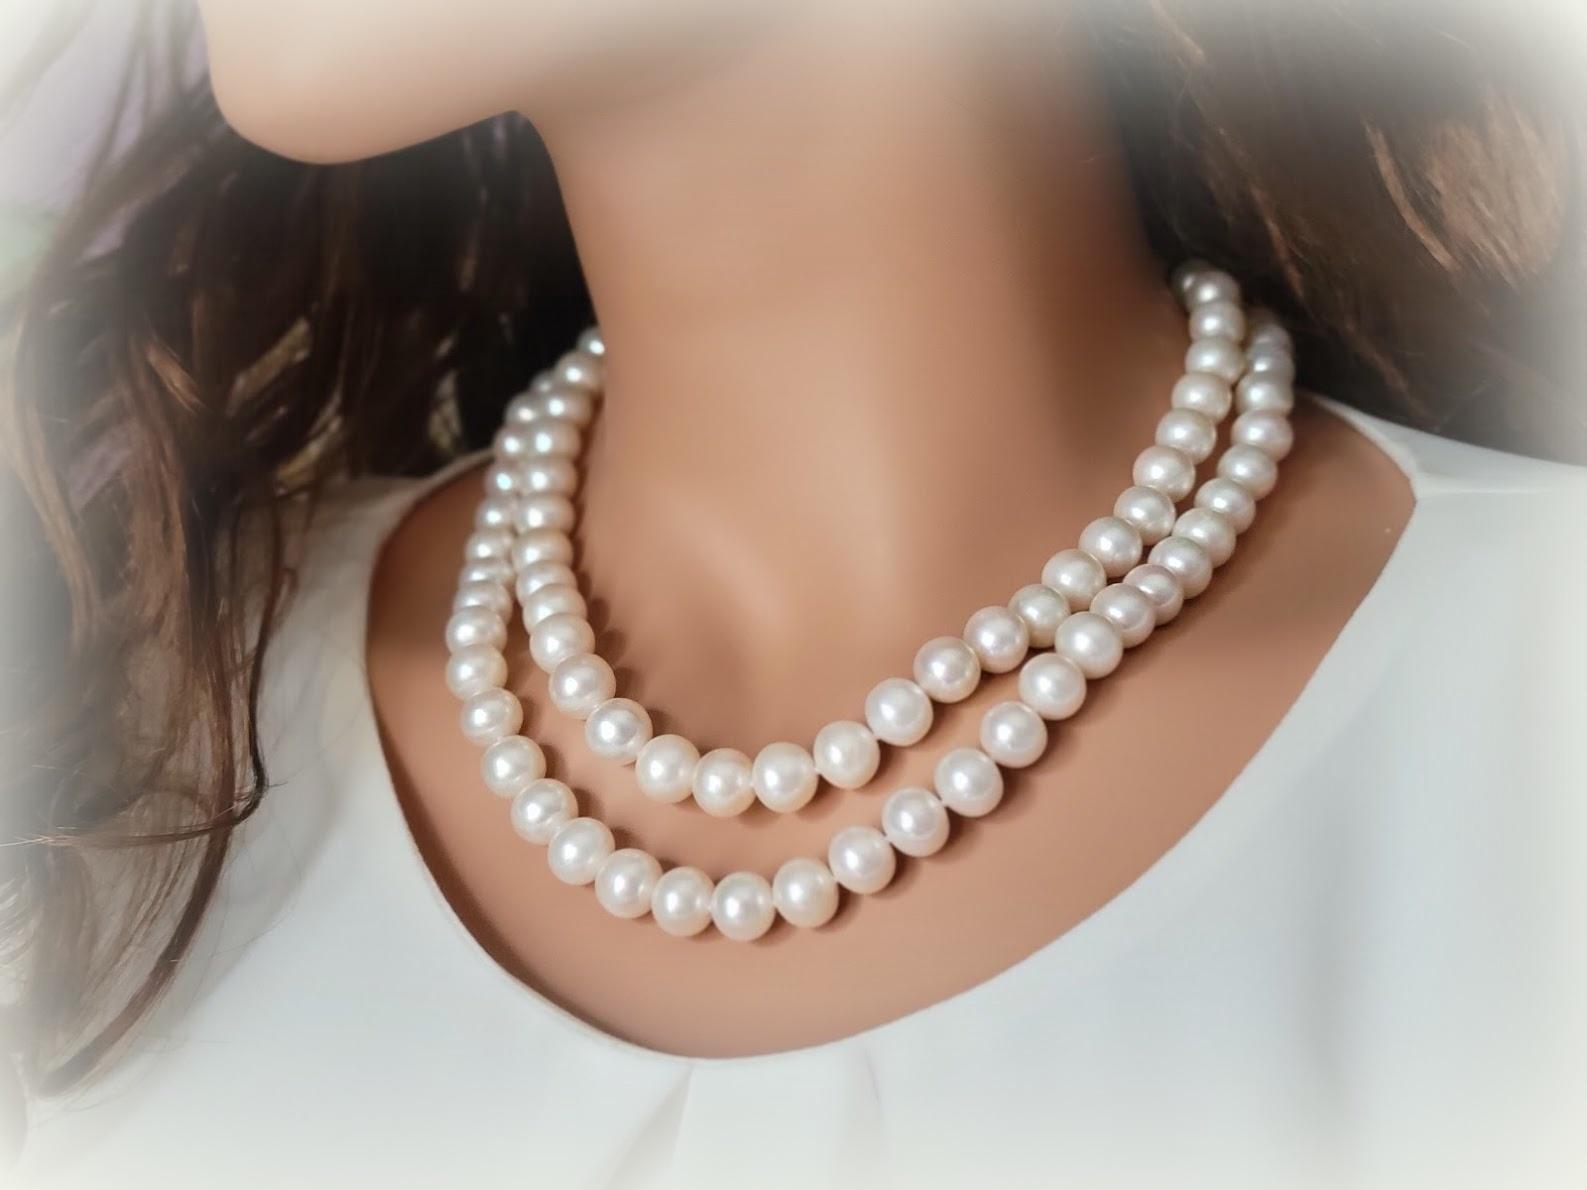 Finished with a sterling silver clasp with genuine freshwater pearls are lustrous Freshwater cultured pearls, double knotted in two rows on white silk. This 18.5-inch double-strand Freshwater pearl necklace is perfect for infusing a touch of